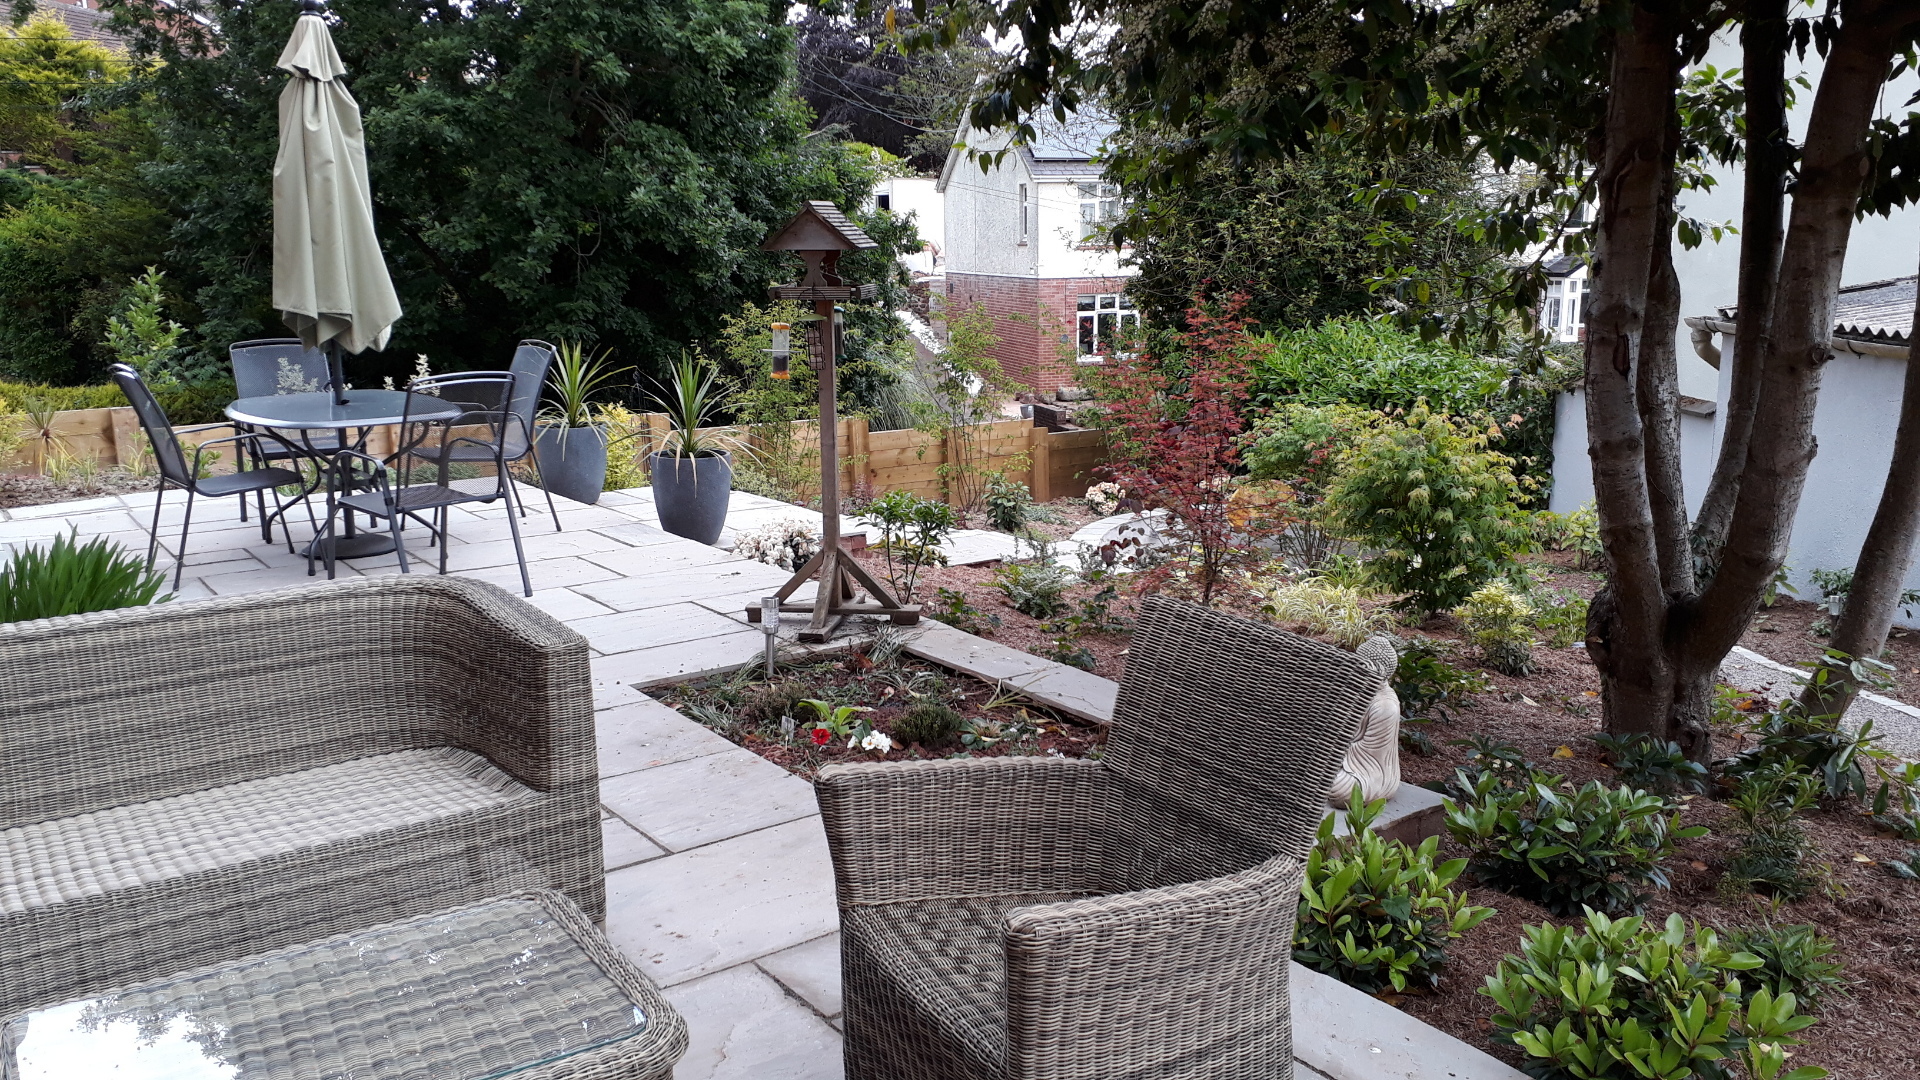 Alison Bockh Garden Design and Landscaping - North Devon - a comfortable useable space